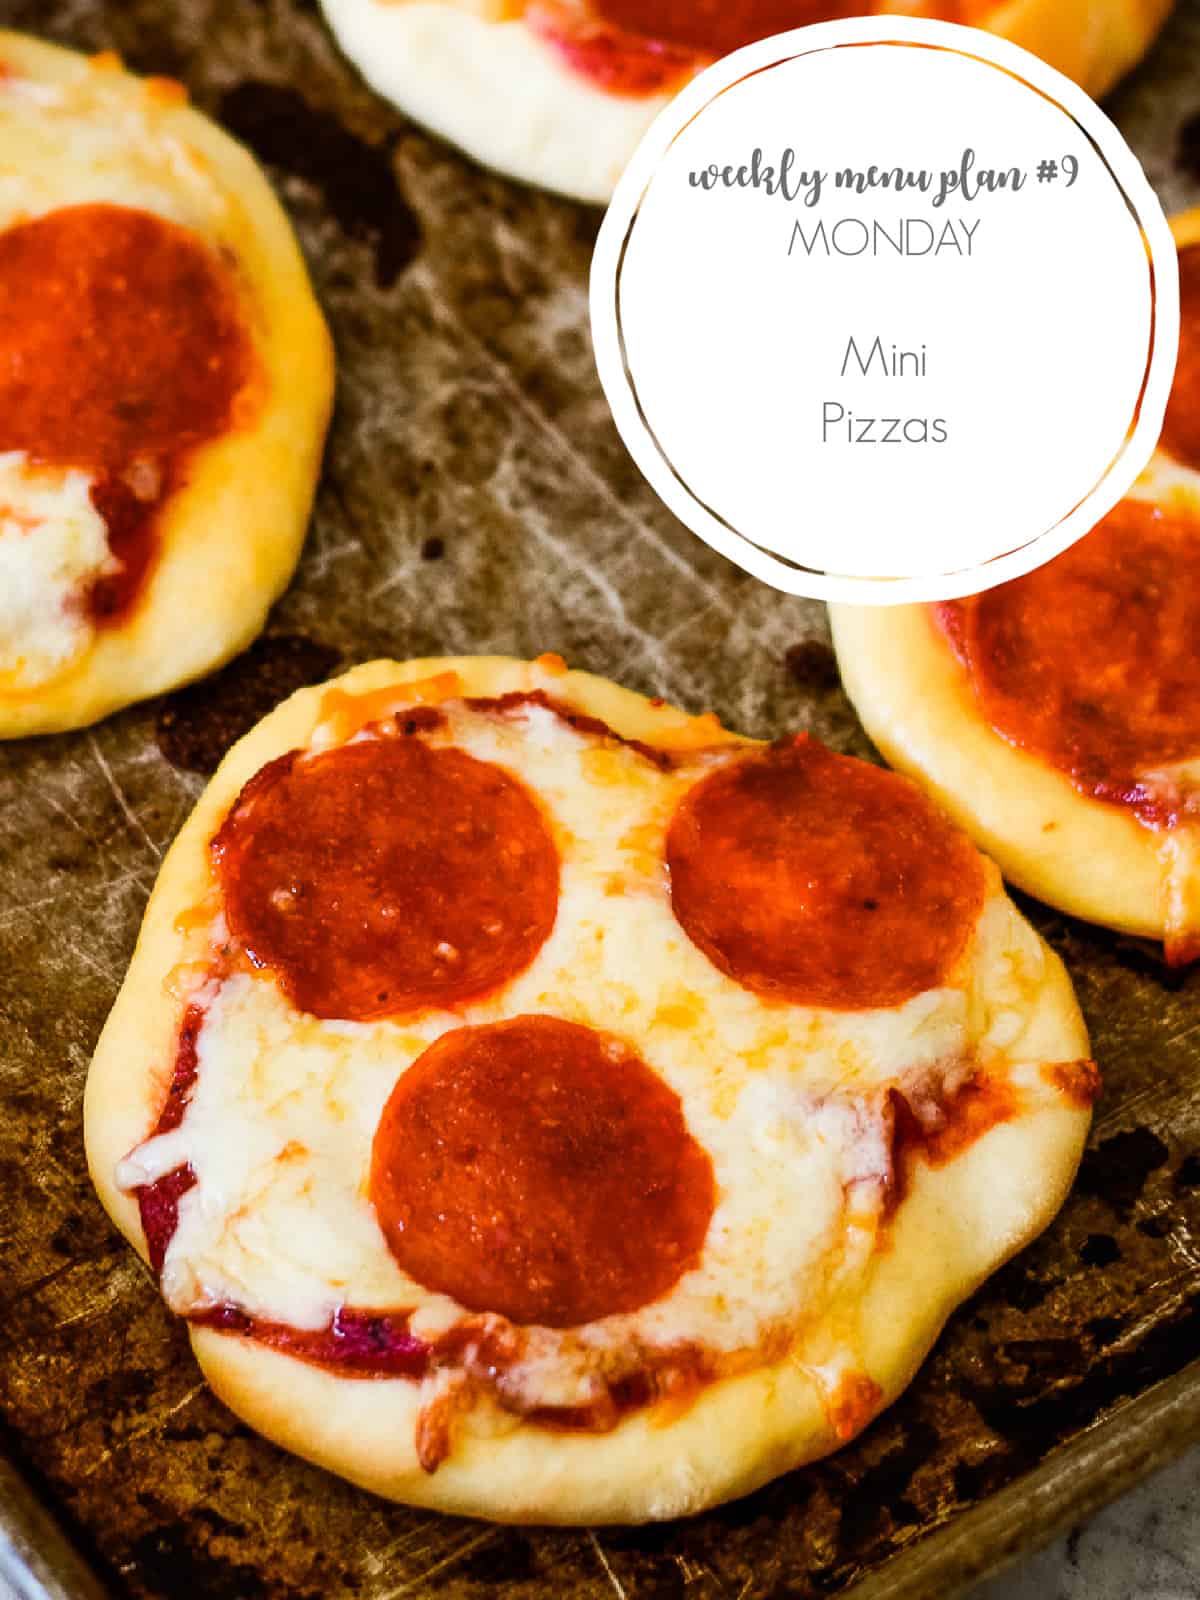 pizza for meal plan #9